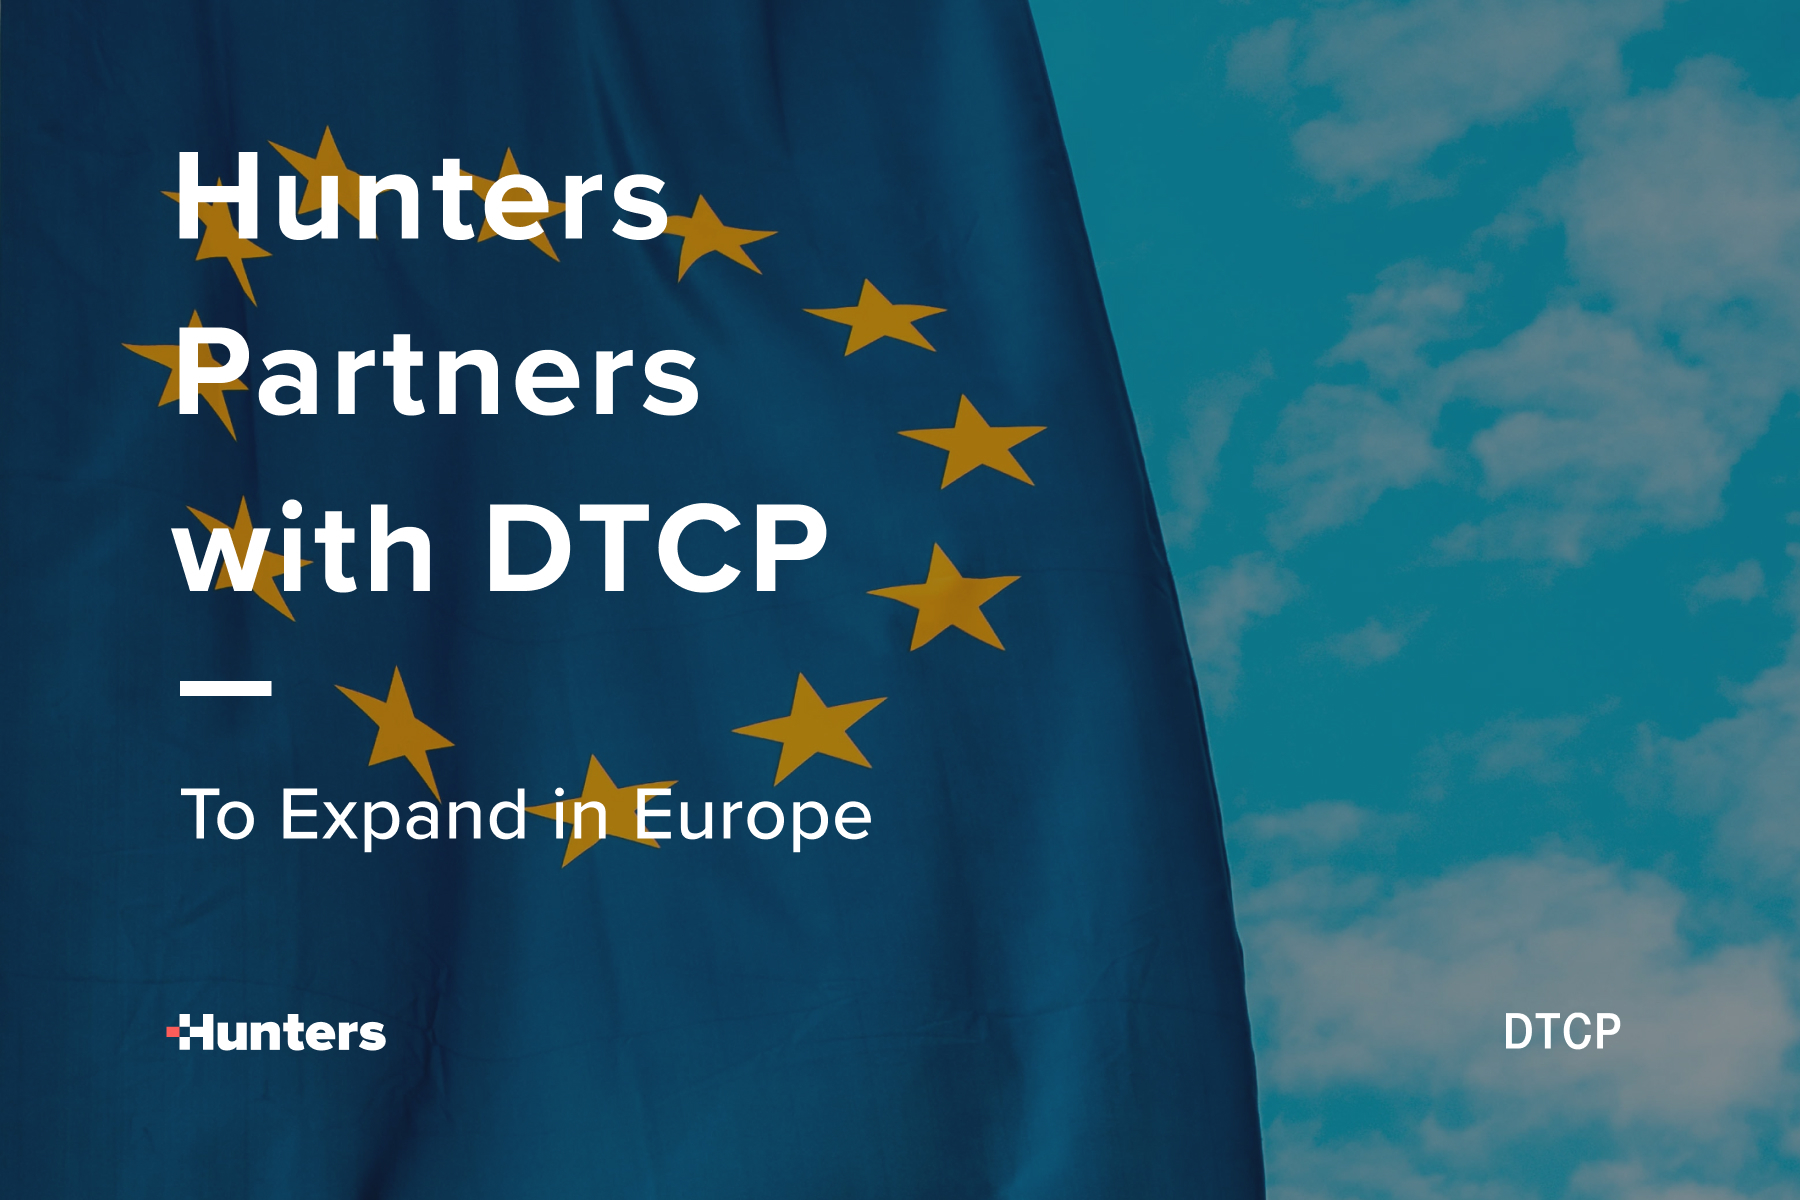 Hunters Partners with DTCP to Become a Leading SOC Platform in European Organizations